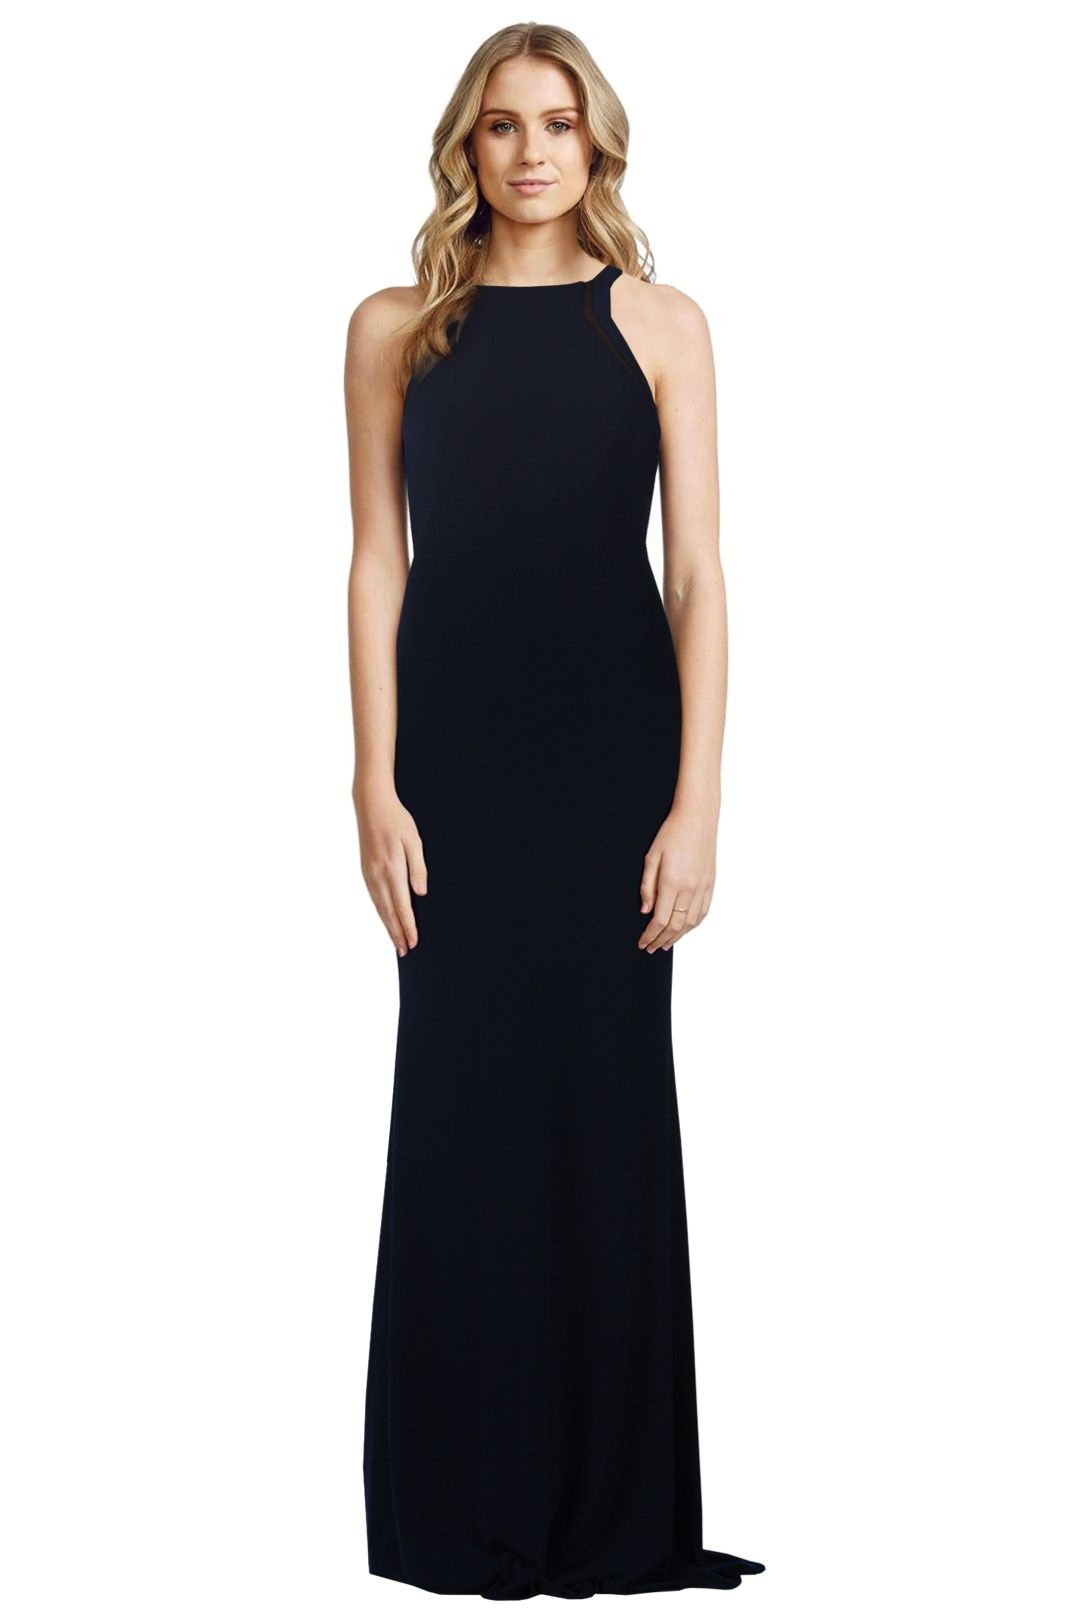 George - Athena Gown - Black - Front